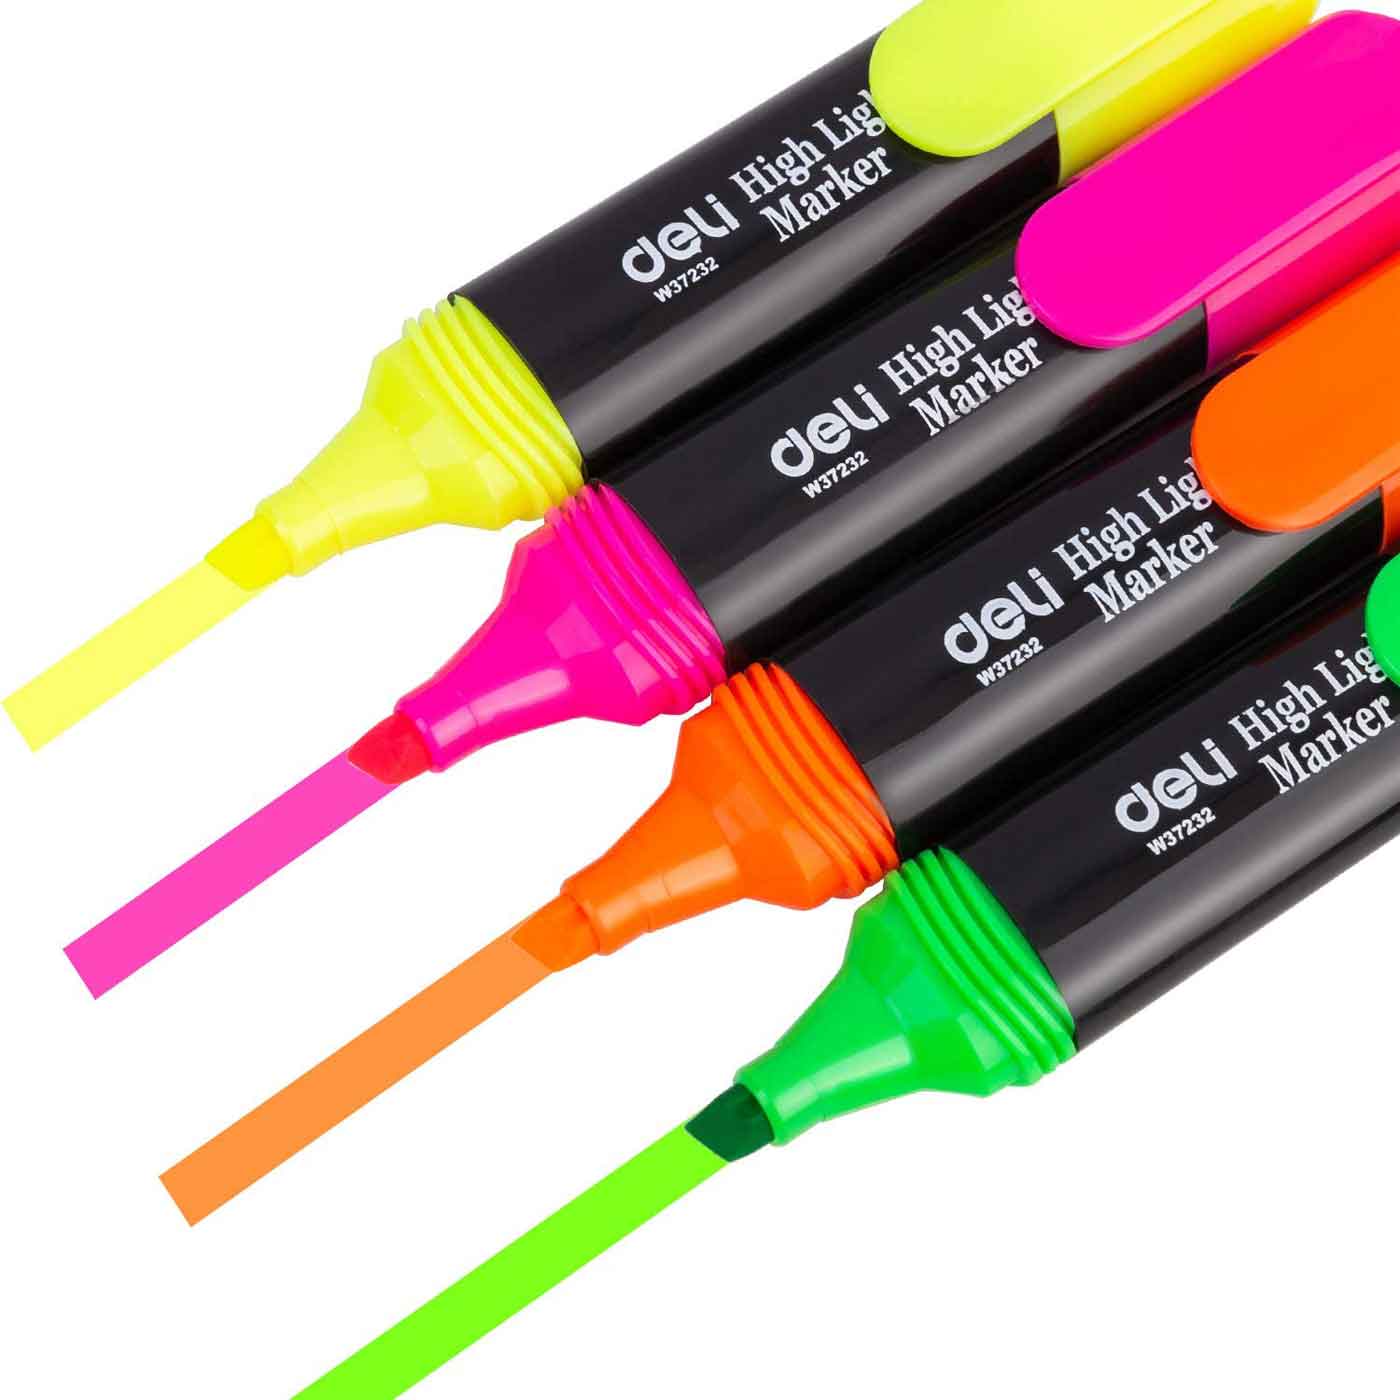 Deli Highlighter Chisel Tip Pack of 4 Assorted Colours